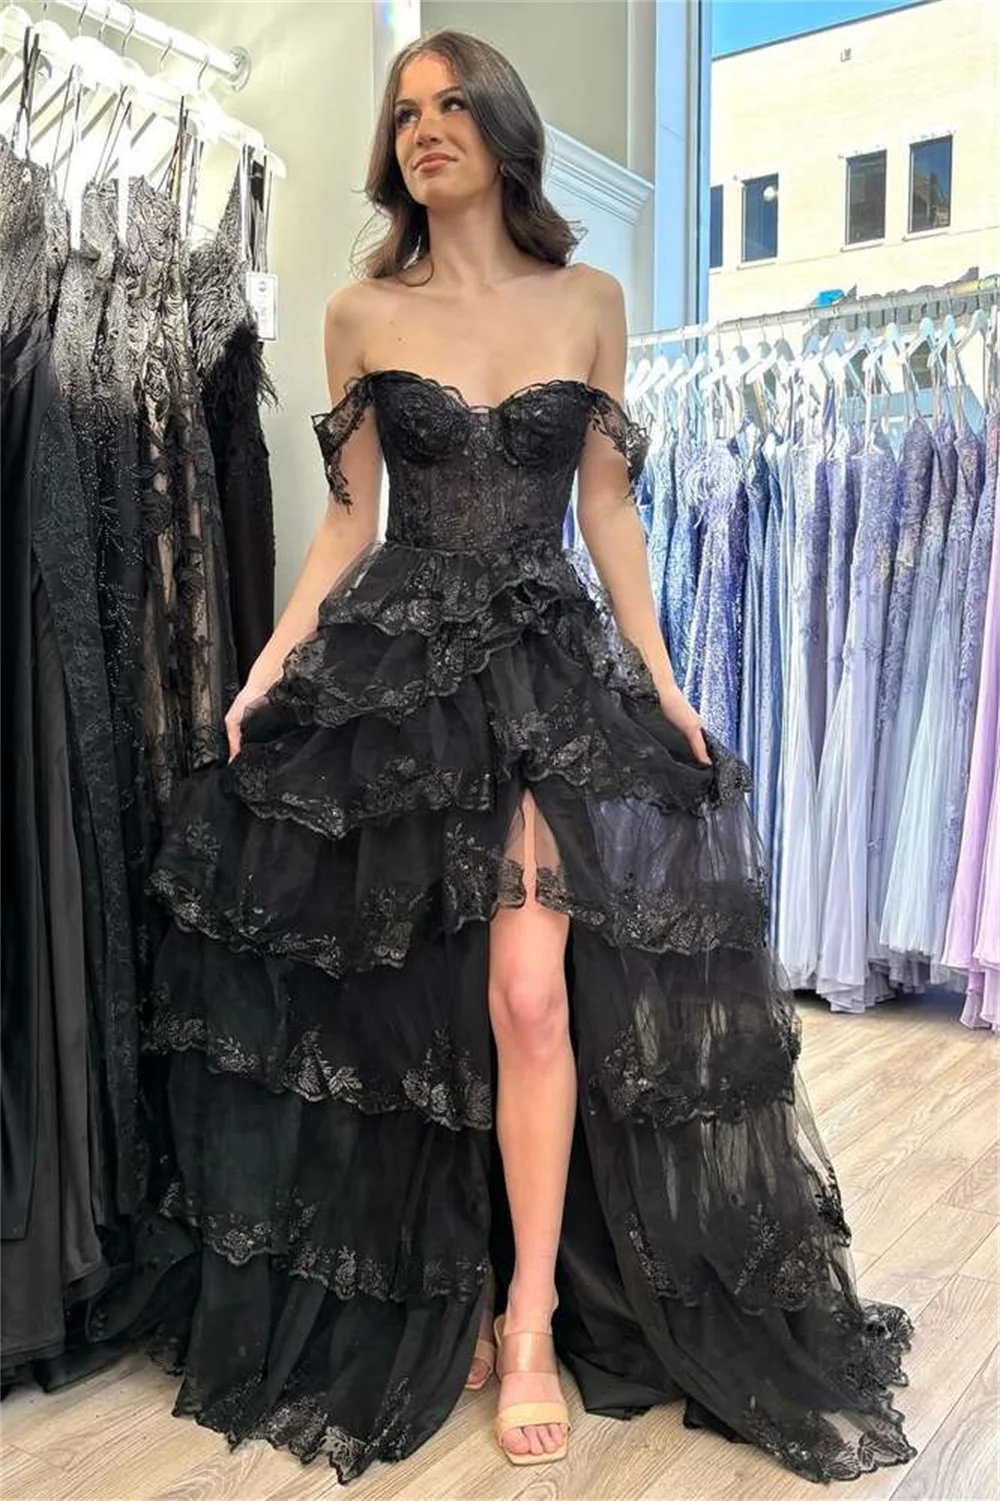 

Off the Shoulder Sweetheart Tiered Ruffles Prom Dresses With Split Side Sparkly Sequins Lace Evening Gowns A-line Long Ball Gown